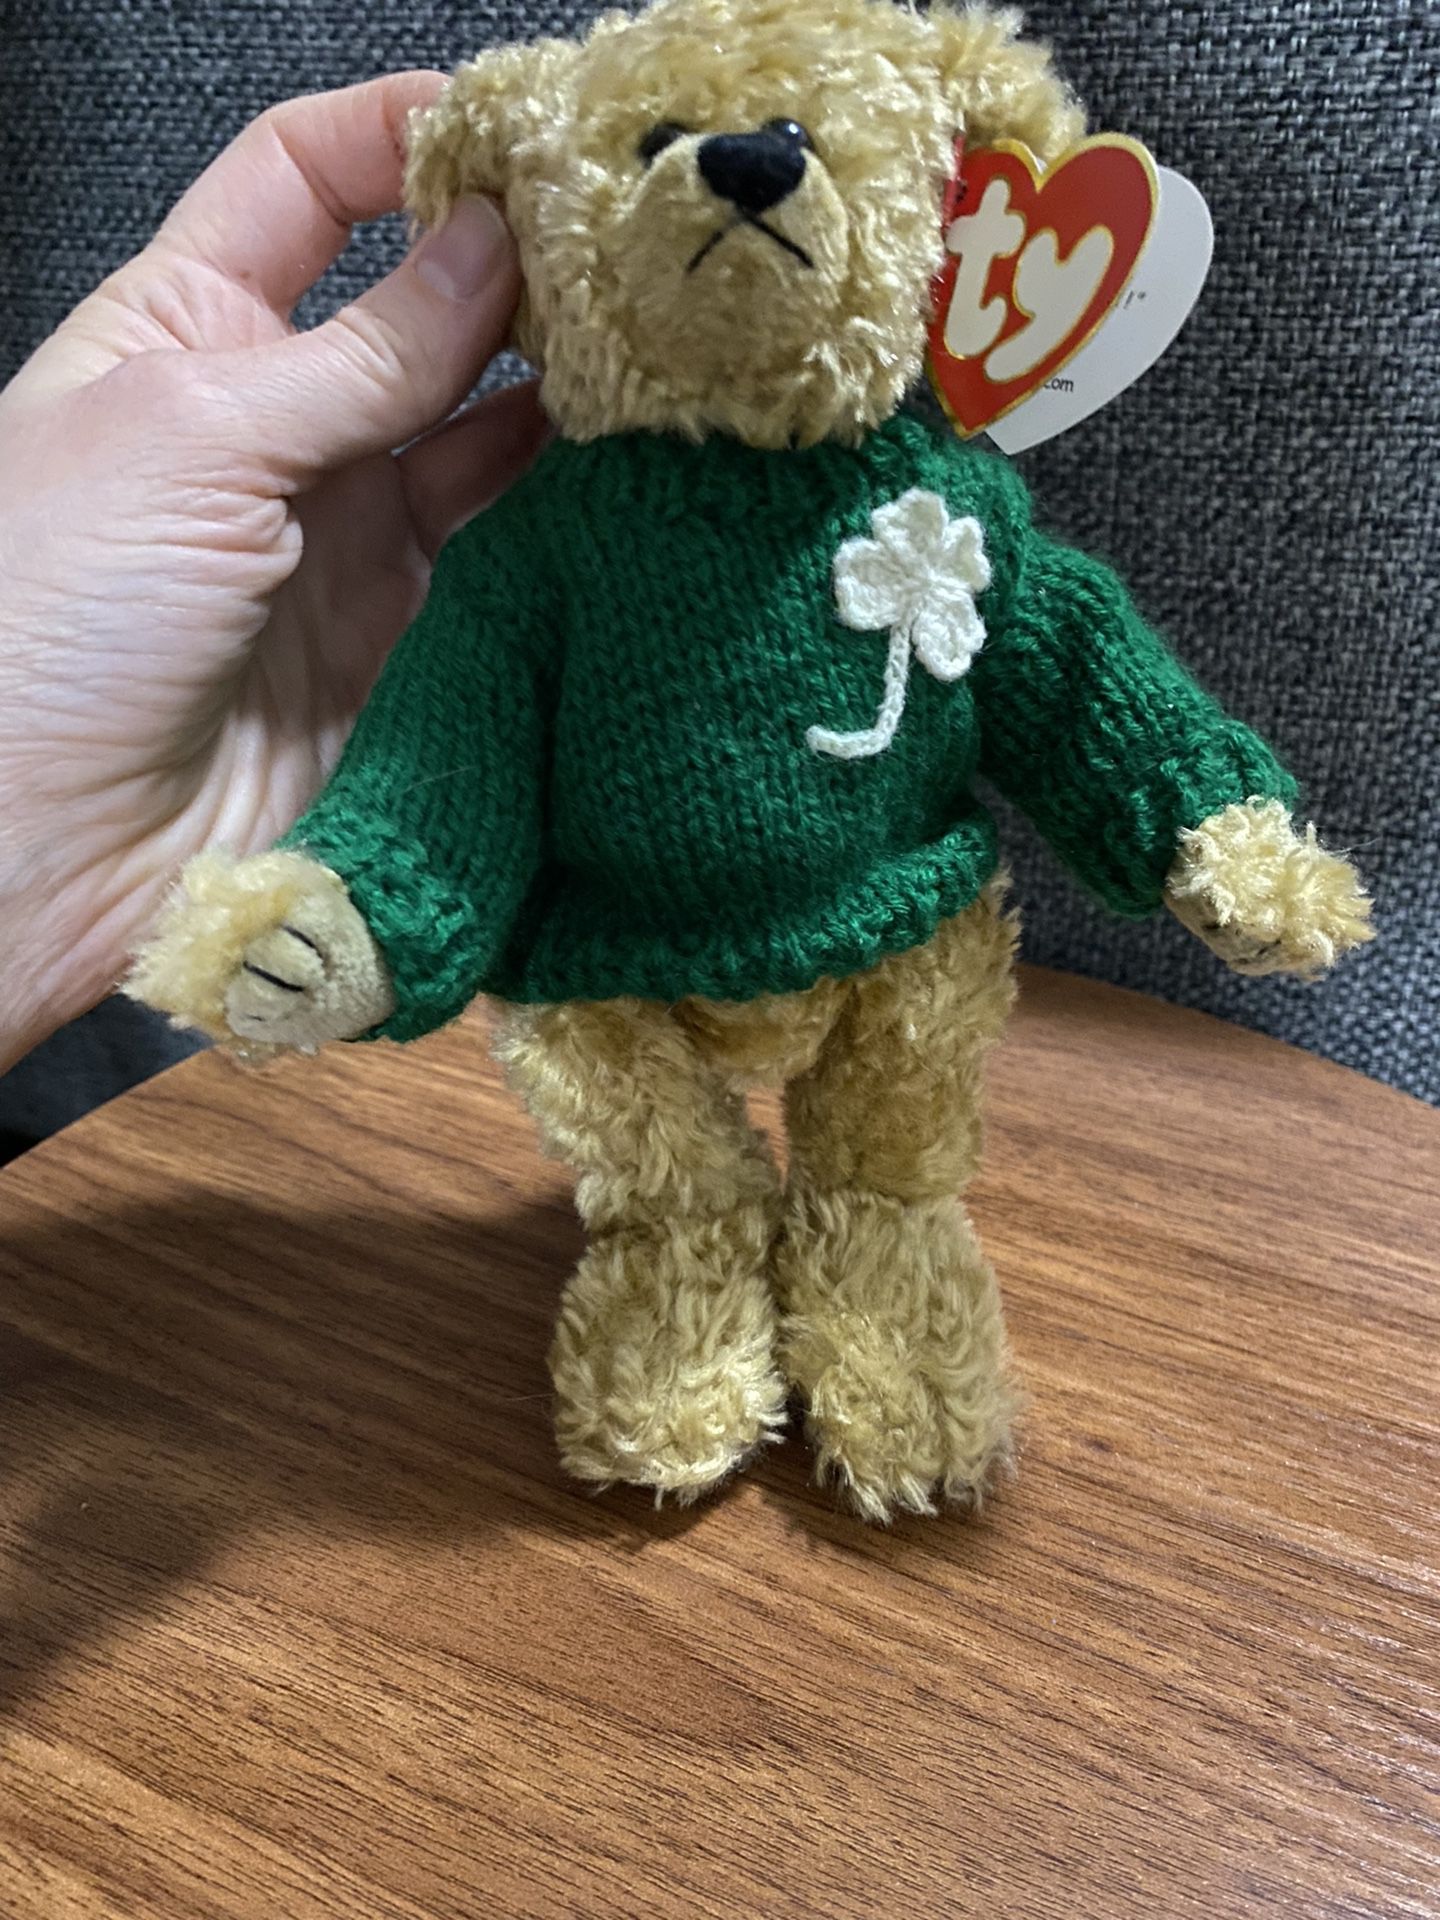 1993 TY Blarney the Bear - The Attic Treasures Collection